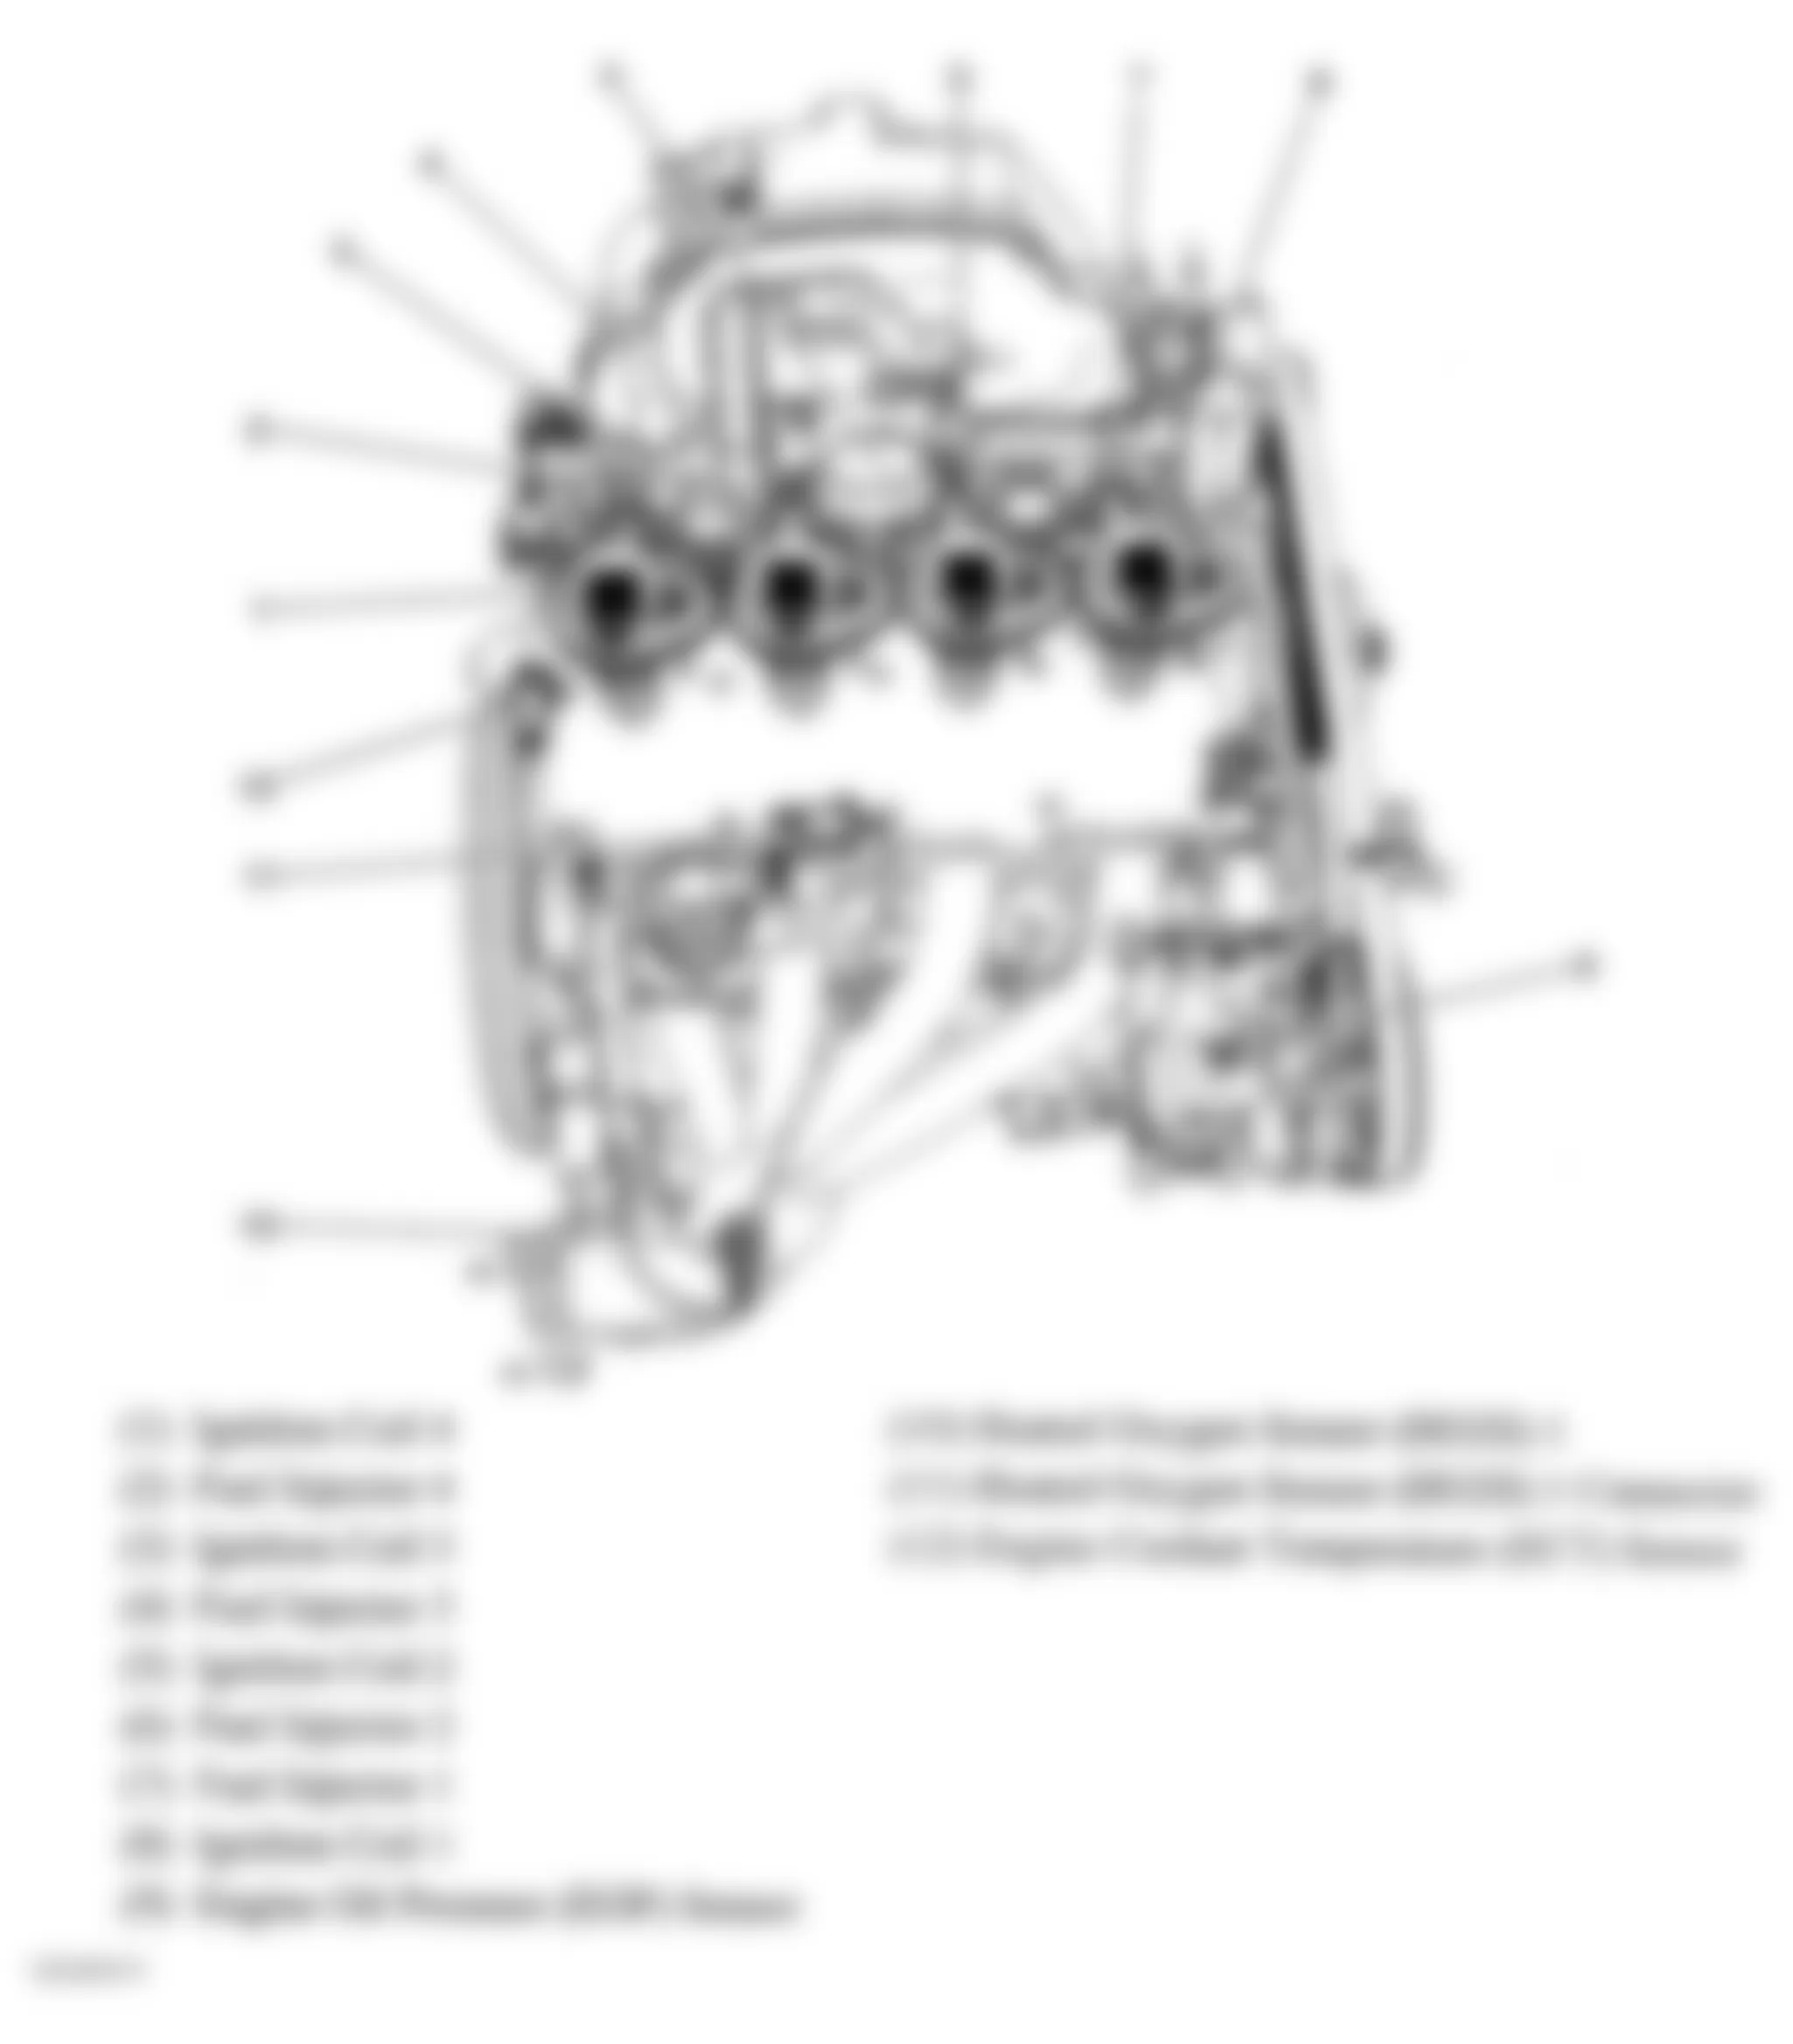 Chevrolet Colorado 2004 - Component Locations -  Top View Of Engine (2.8L)